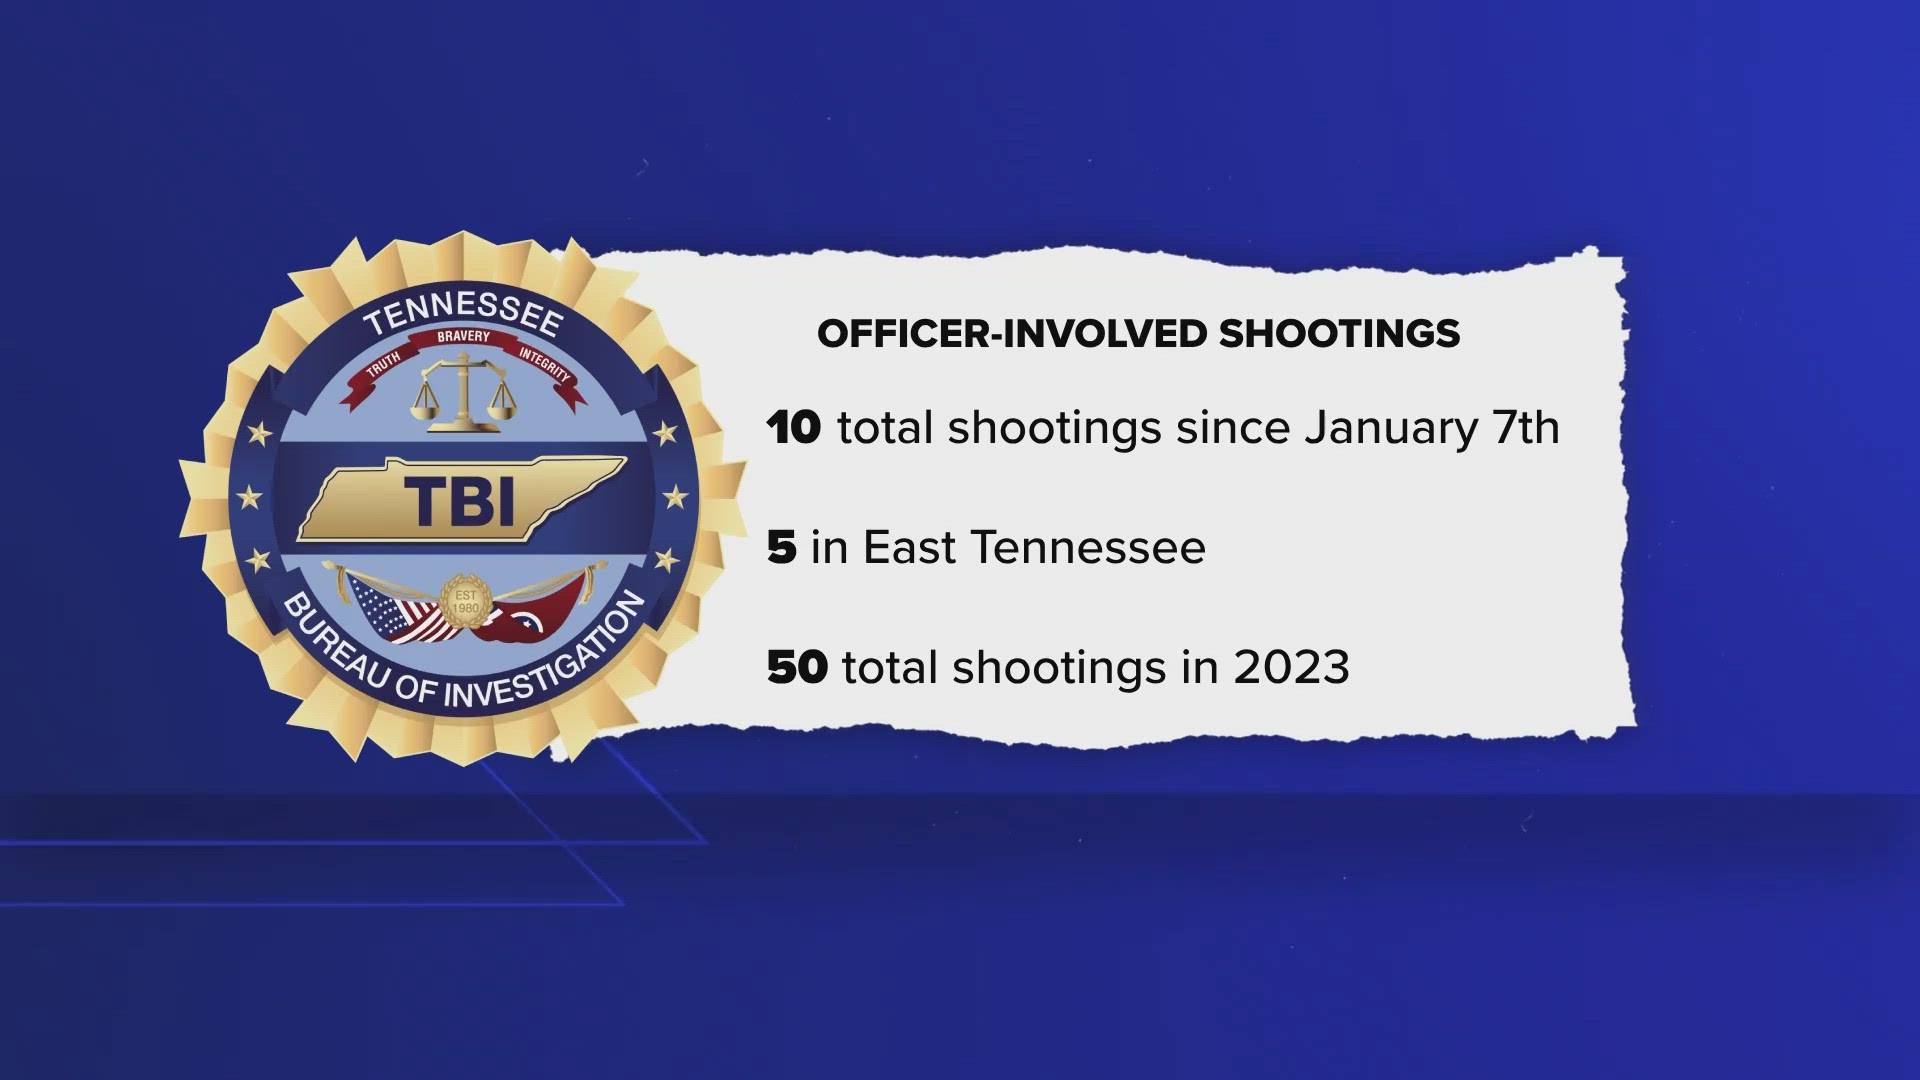 TBI said the shooting in Blount County marks the tenth officer-involved shooting this year. Half of those shootings happened in East Tennessee.